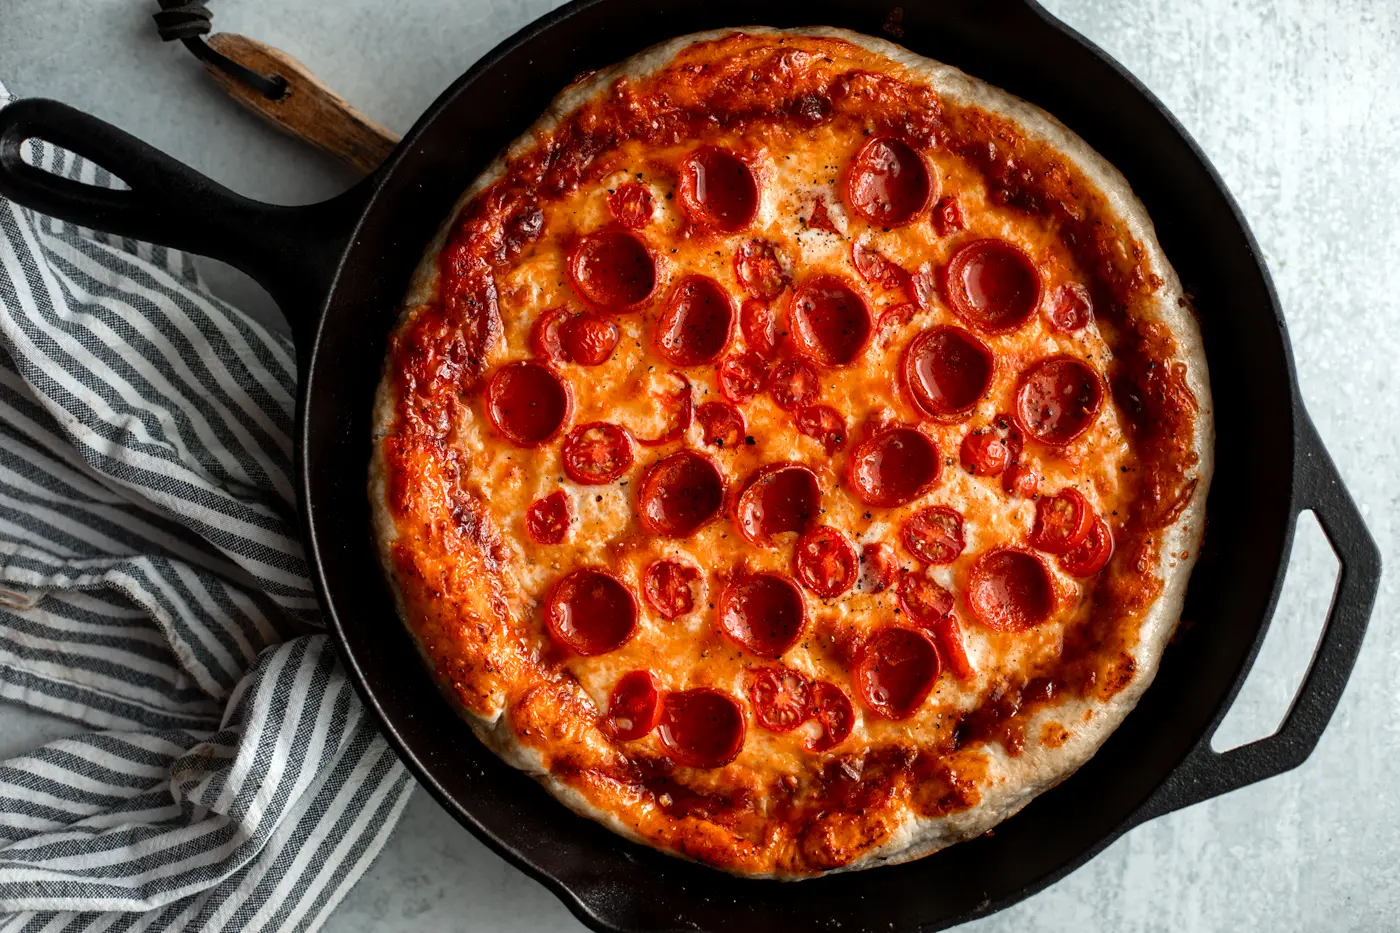 cast iron pizza recipe - Does cast iron work well for pizza